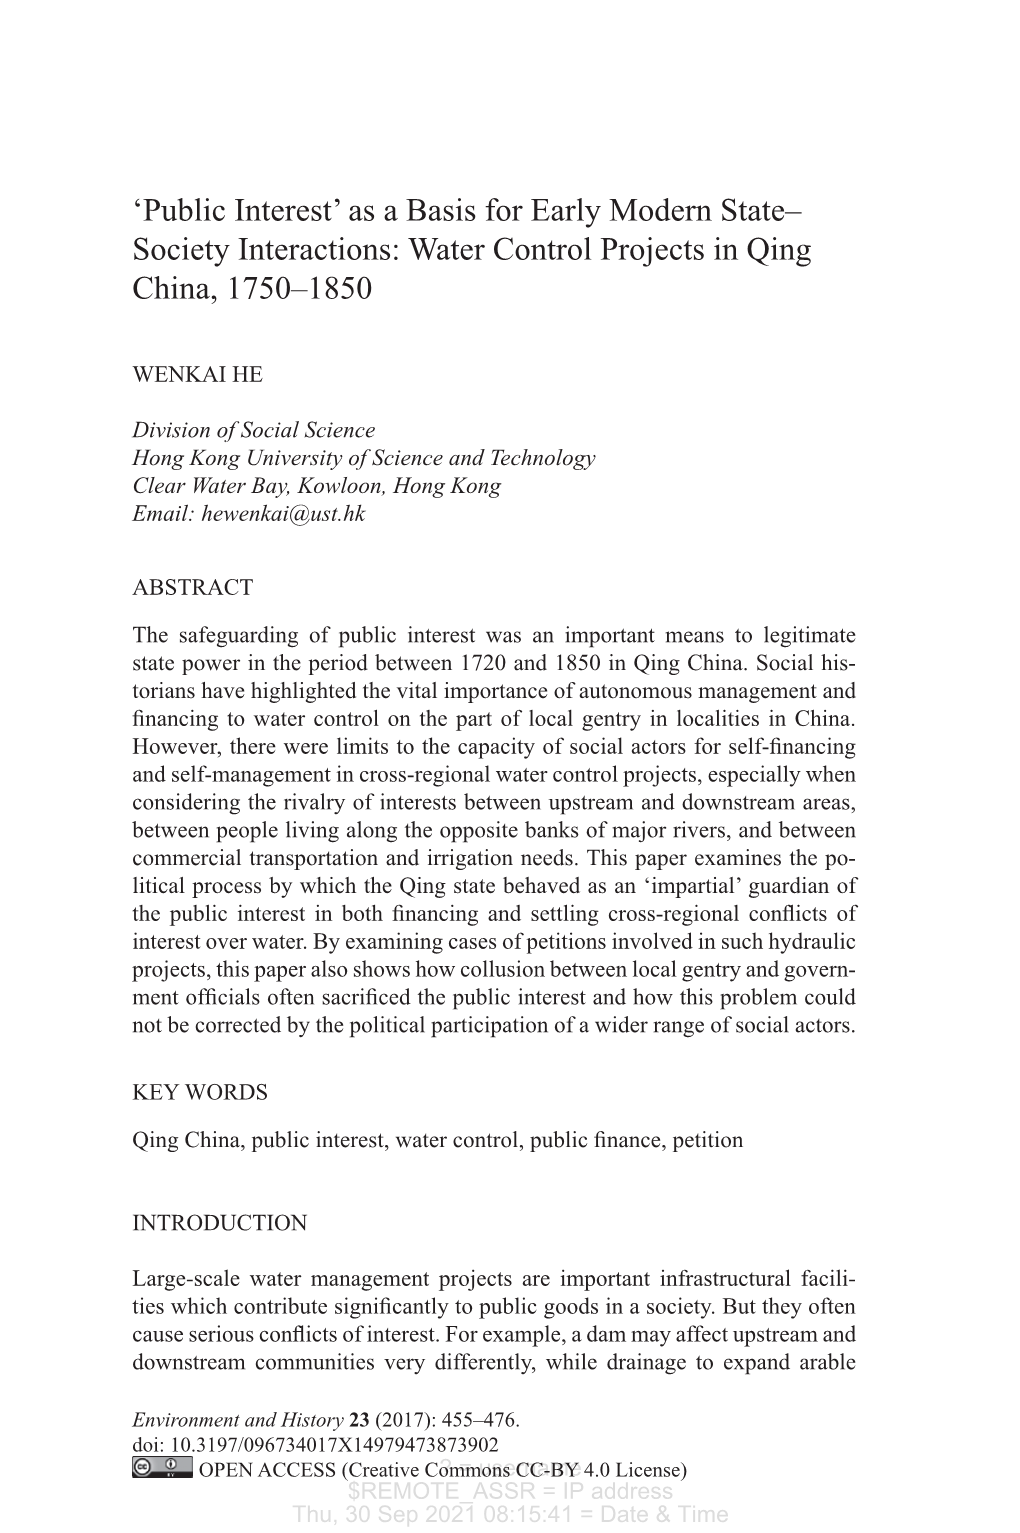 Water Control Projects in Qing China, 1750-185